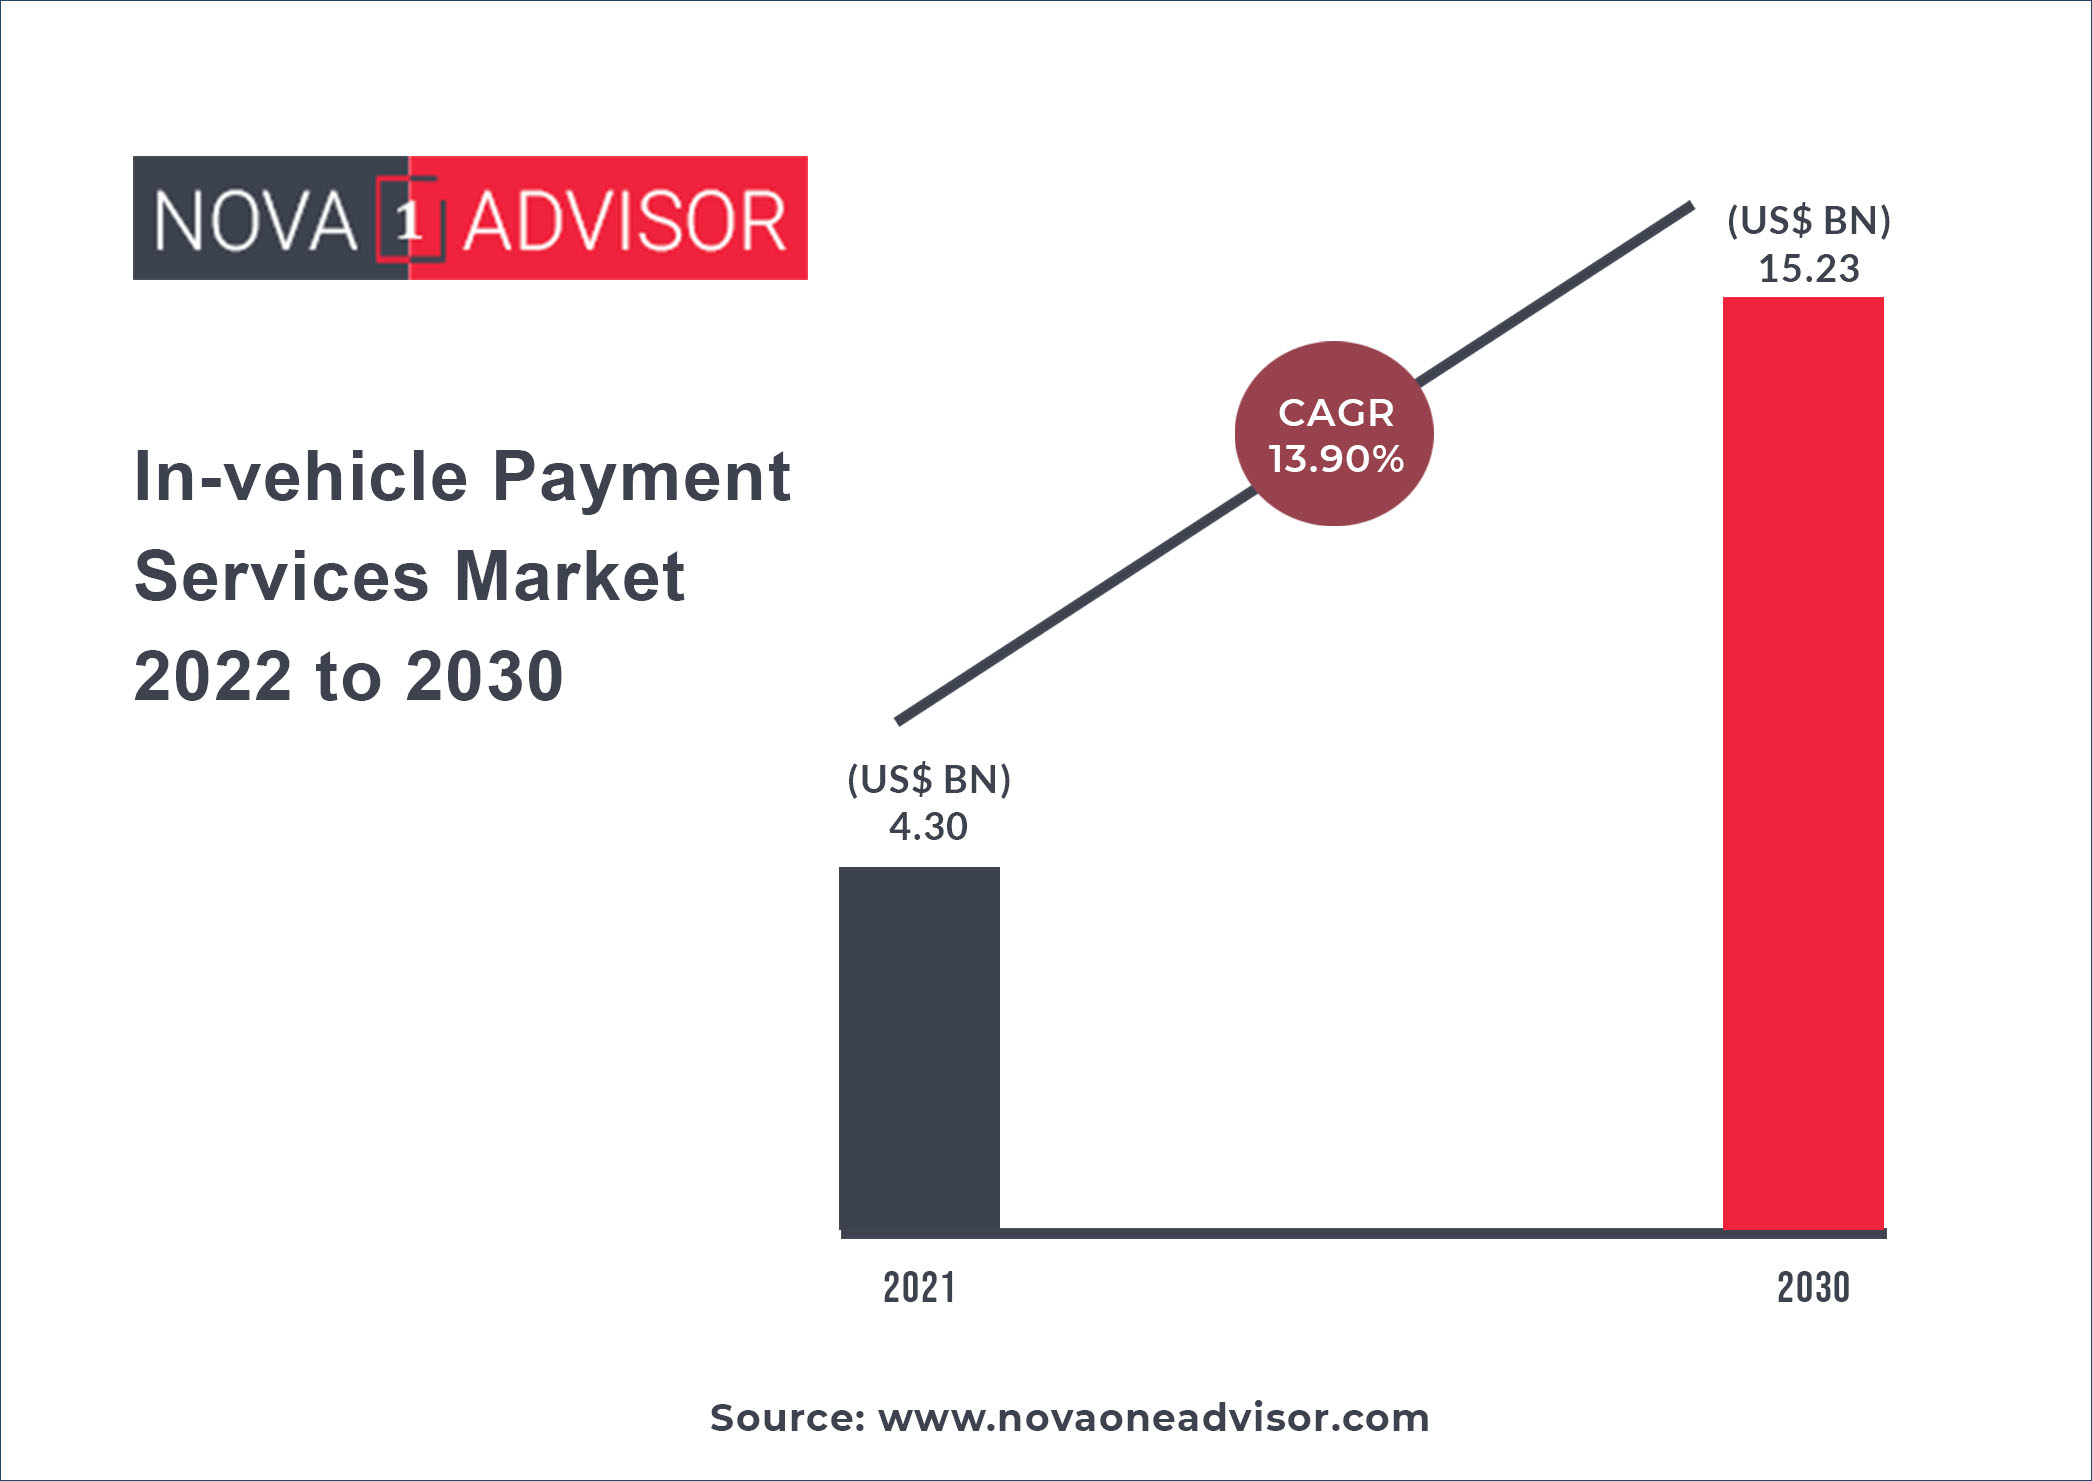 https://www.novaoneadvisor.com/reportimg/In-vehicle-Payment-Services-Market-2022-to-2030.jpg